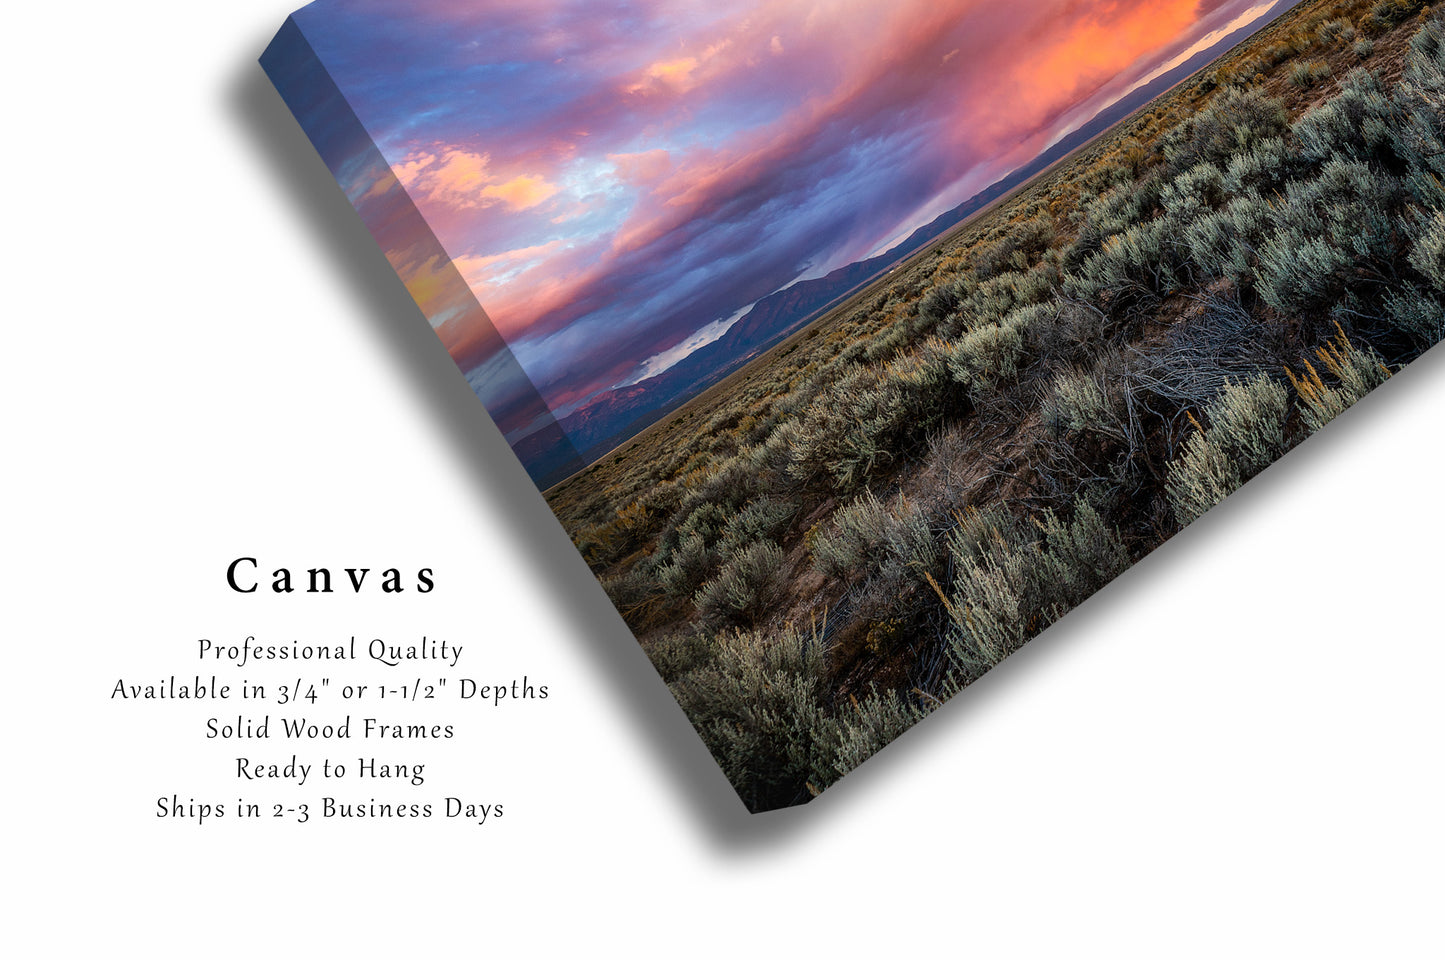 Southwest Canvas | Colorful Storm Gallery Wrap | Taos New Mexico Photography | Monsoon Wall Art | Nature Decor | Ready to Hang